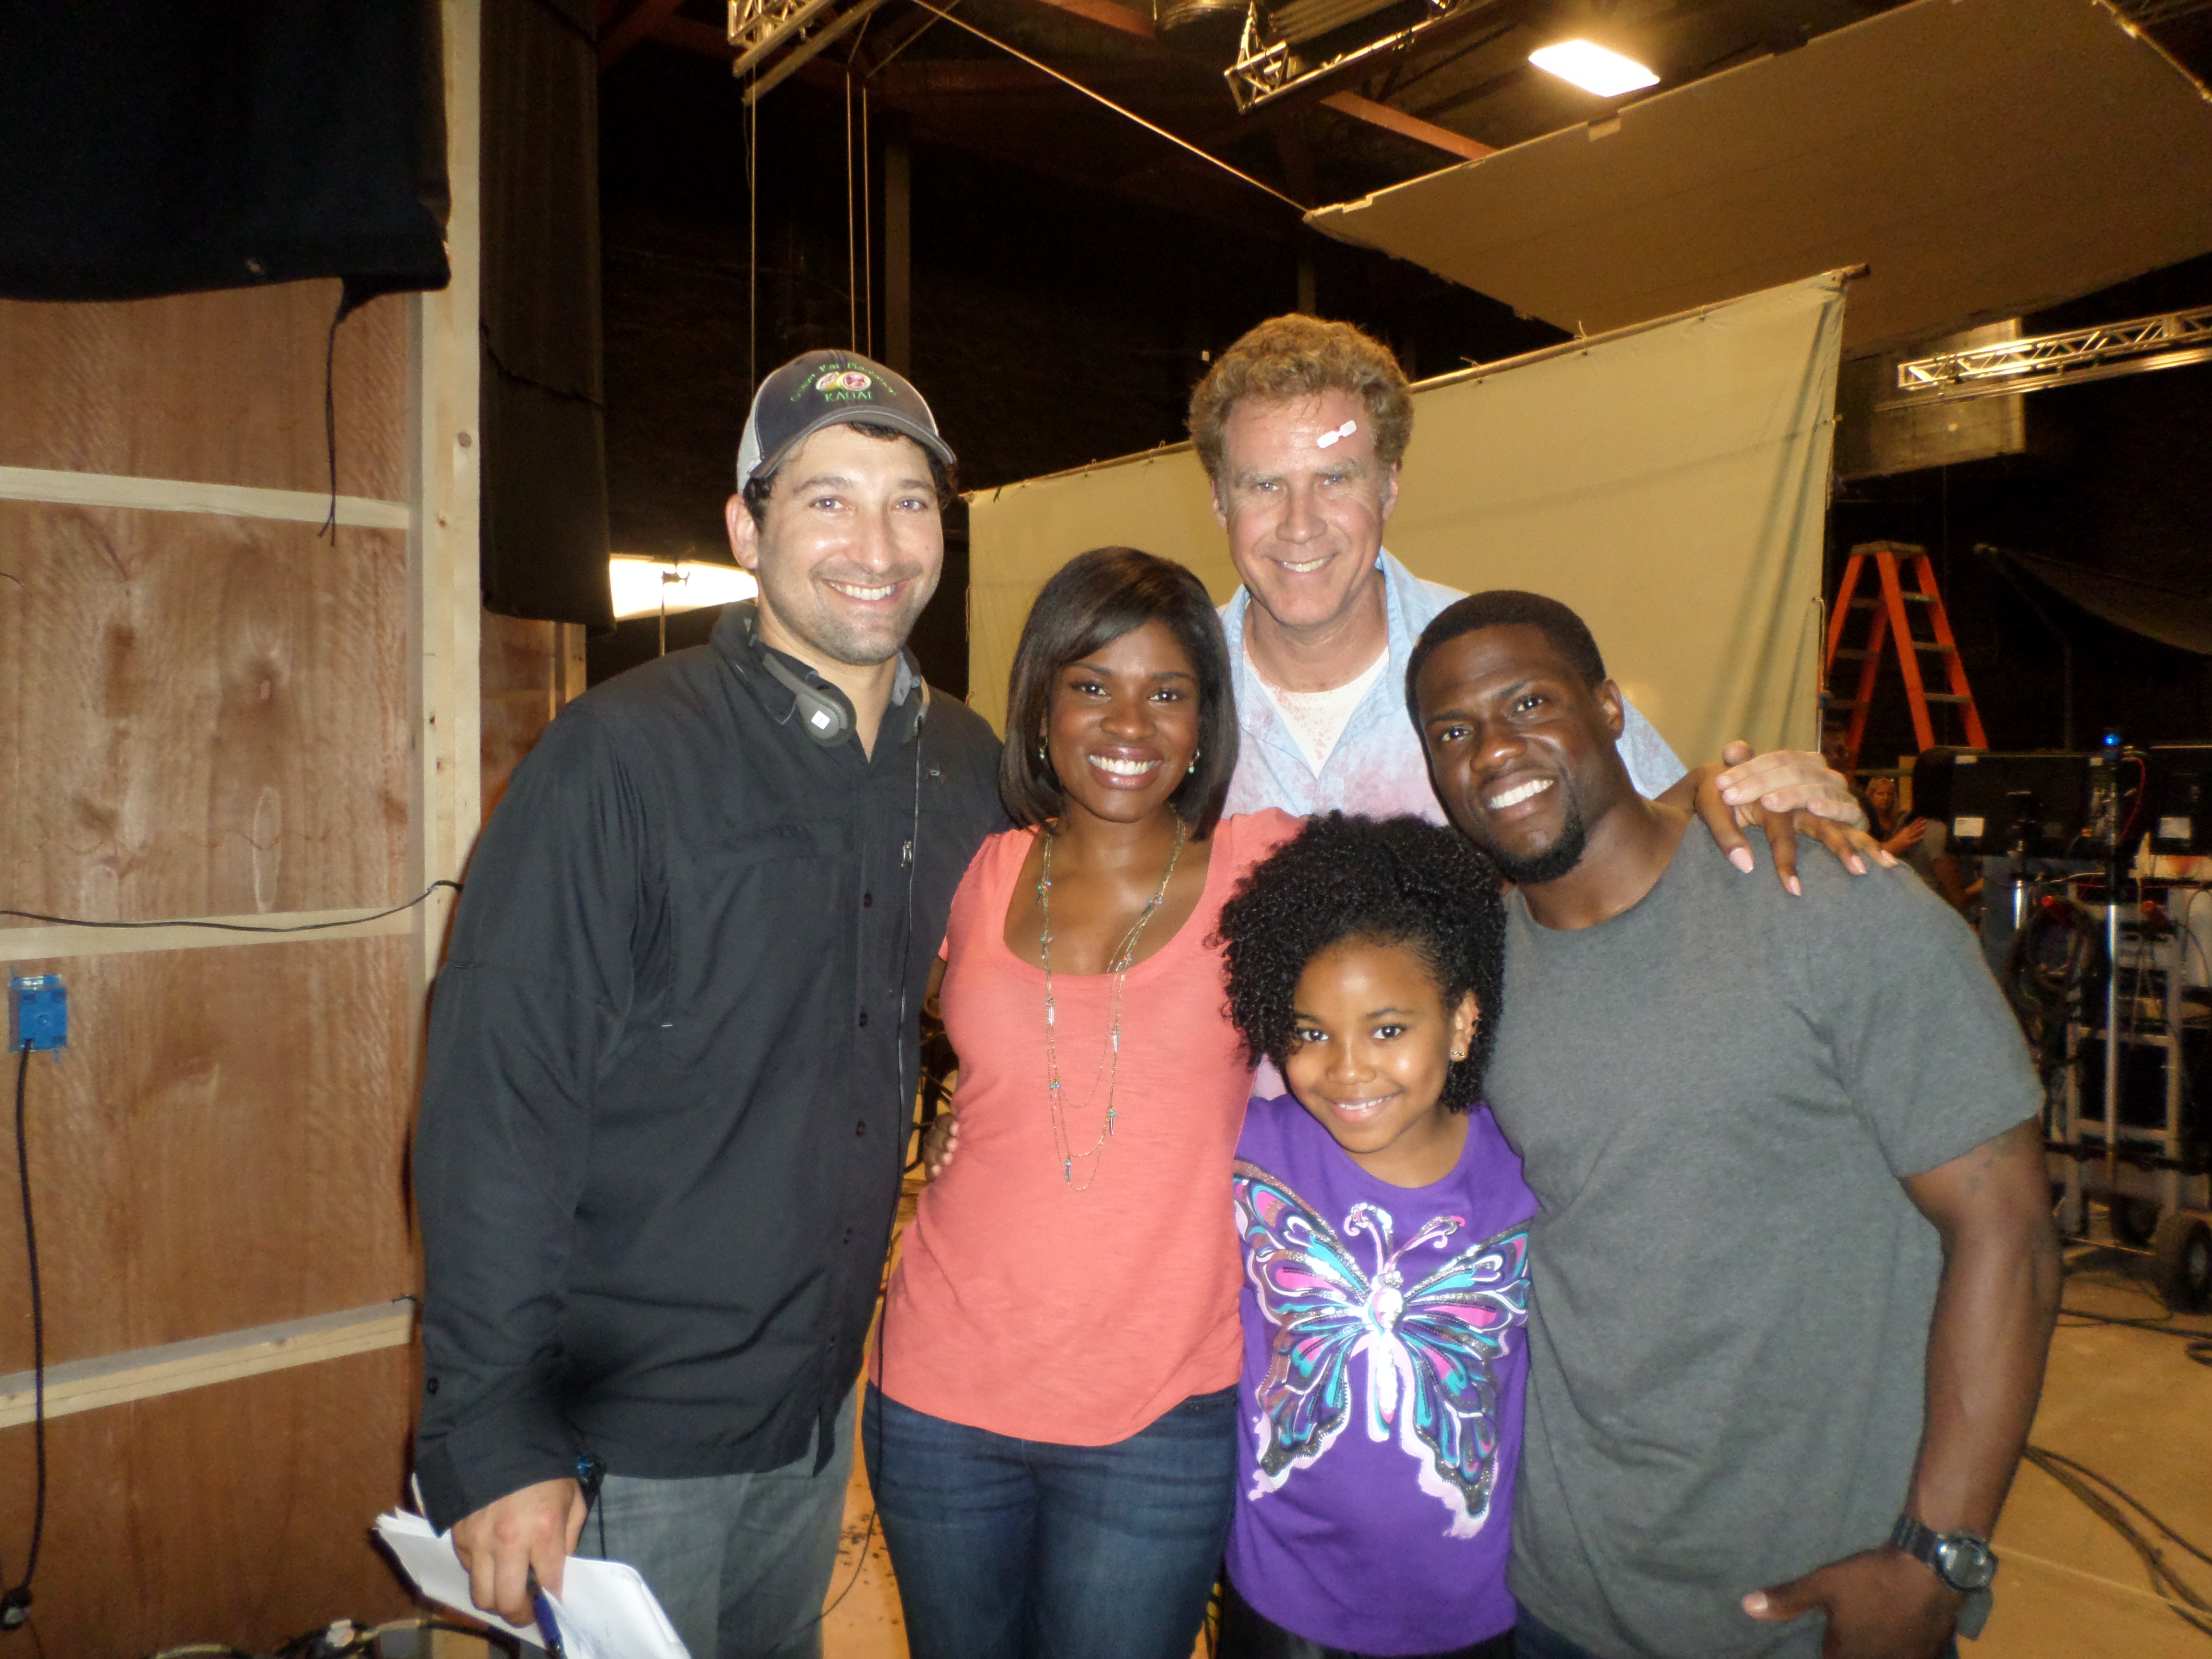 Ariana pictured with director Etan Cohen, Will Ferrell, Edwina Findley and Kevin Hart